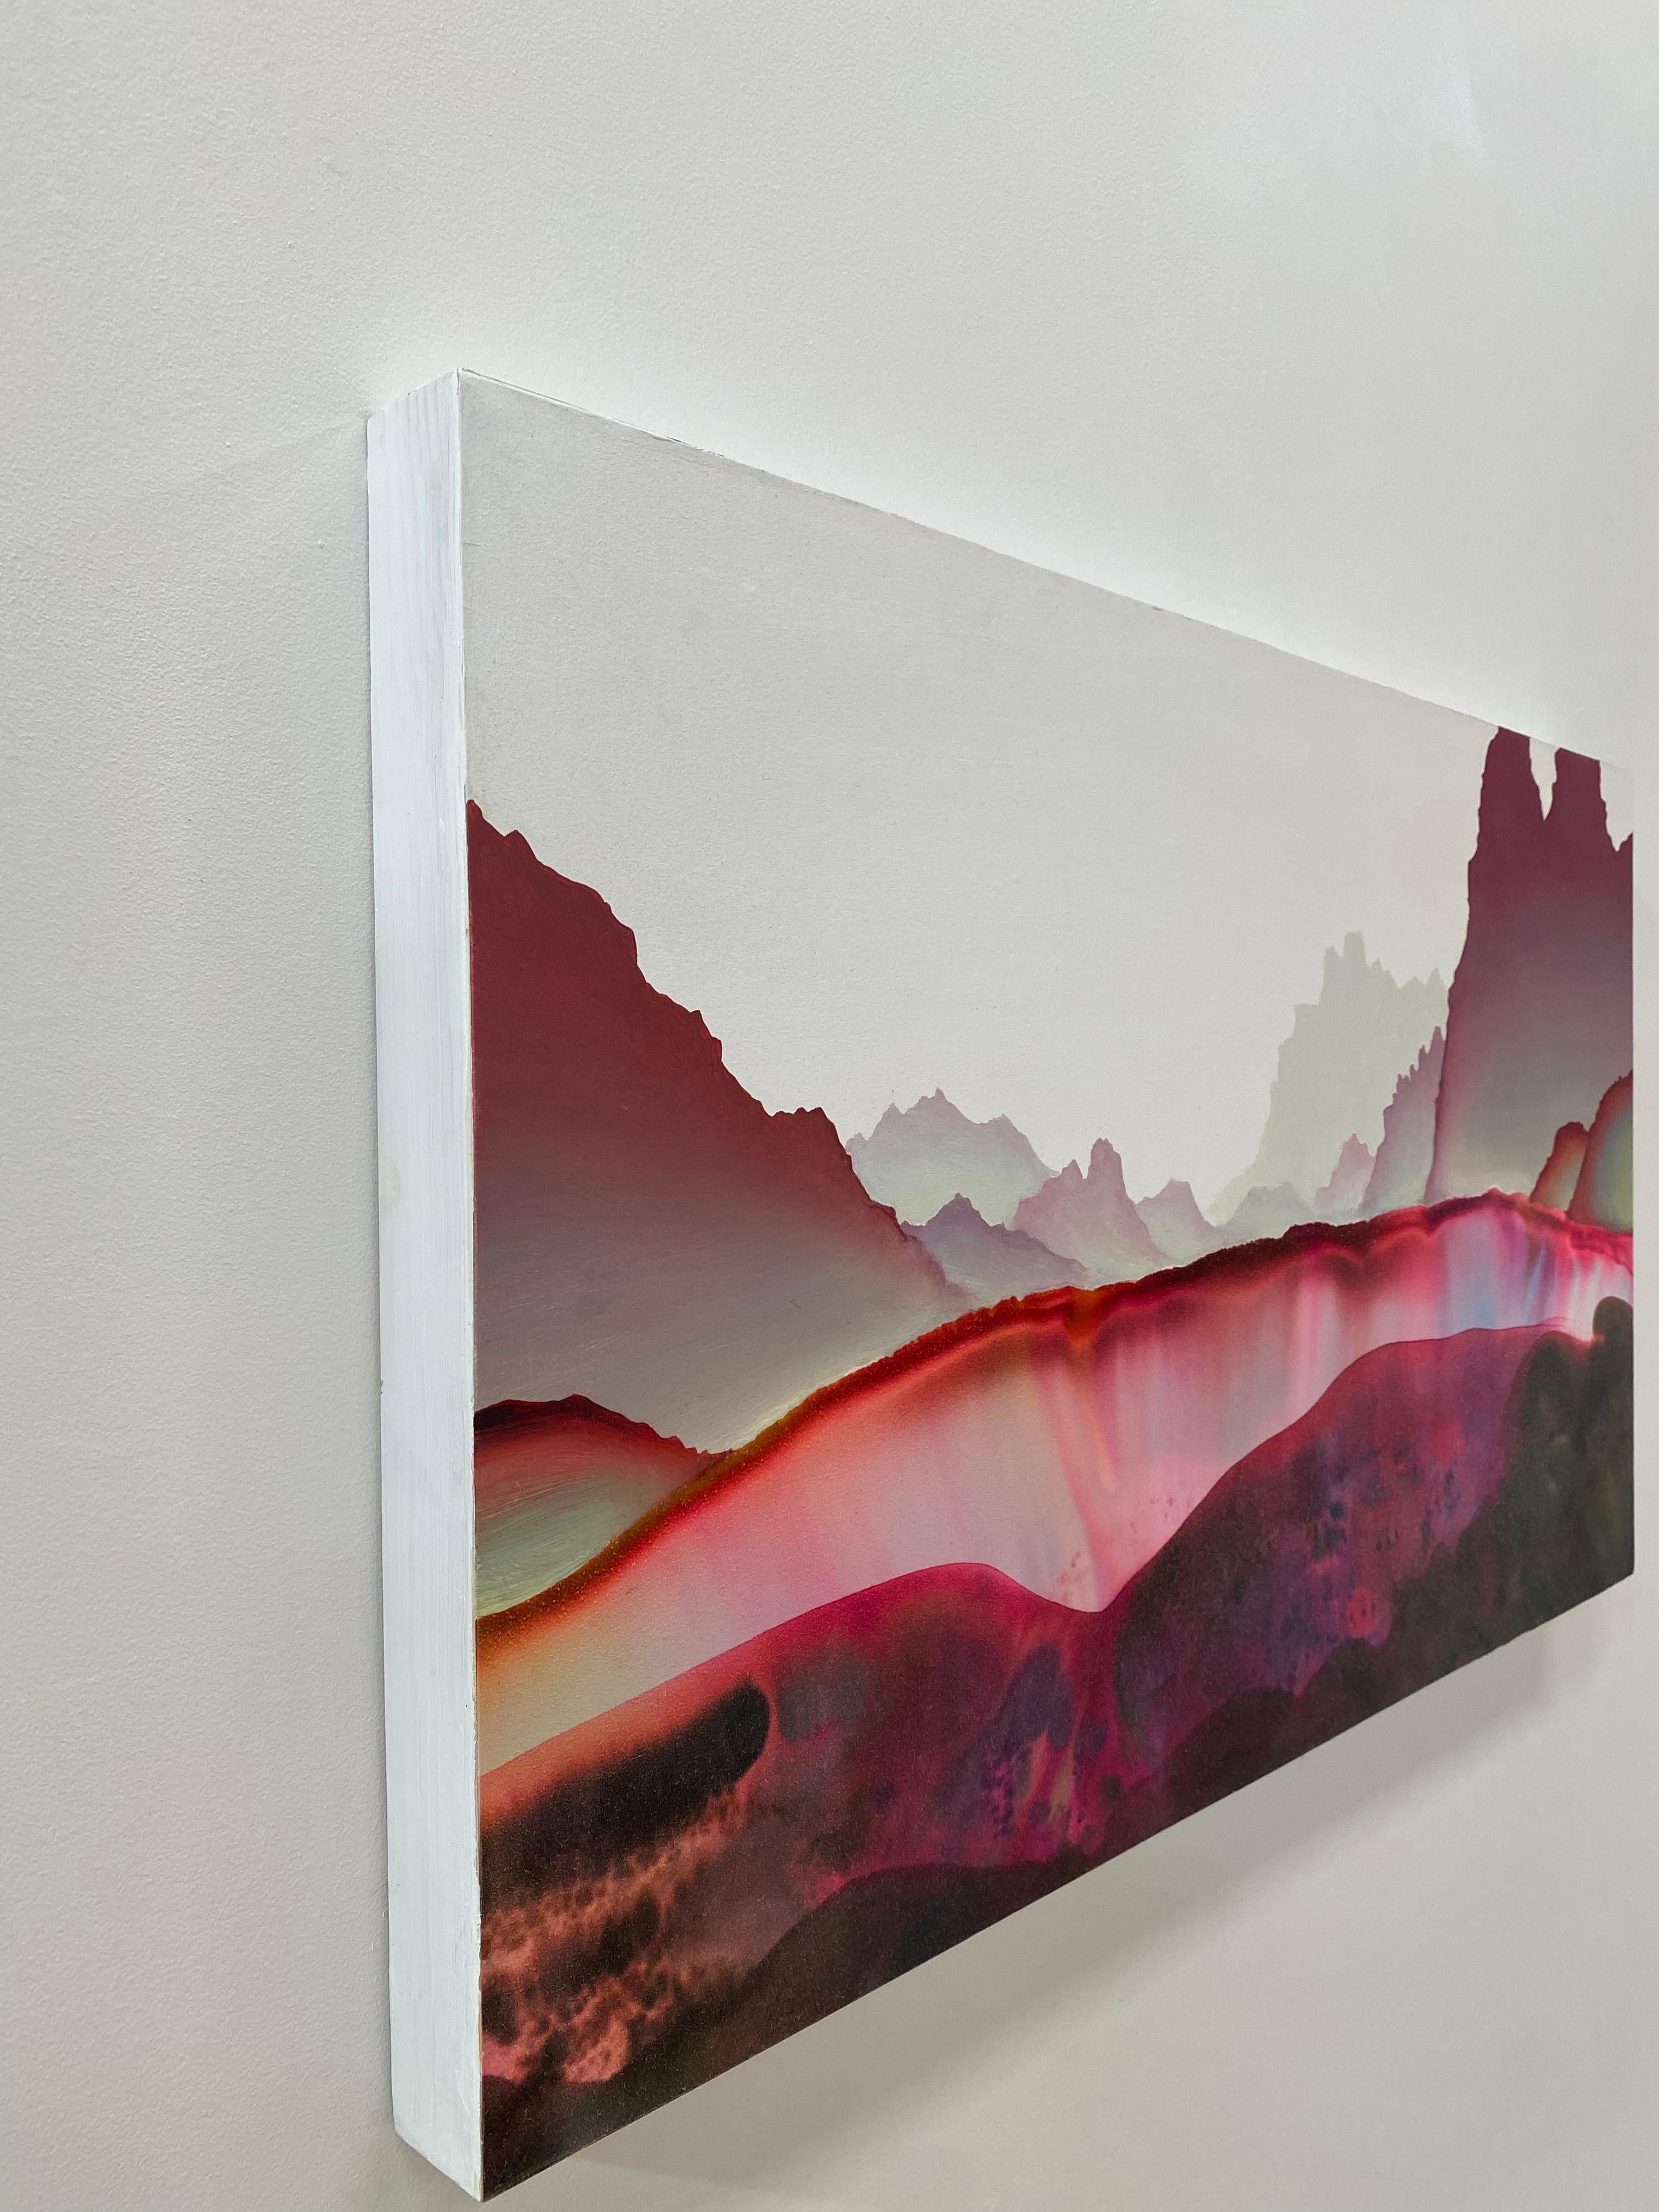 In this horizontal landscape painting in ink and oil on paper mounted on panel, the artist's unique ink process creates soft striations of bright pink, dark crimson red, pale yellow and orange at the center of a layered, undulating composition. The